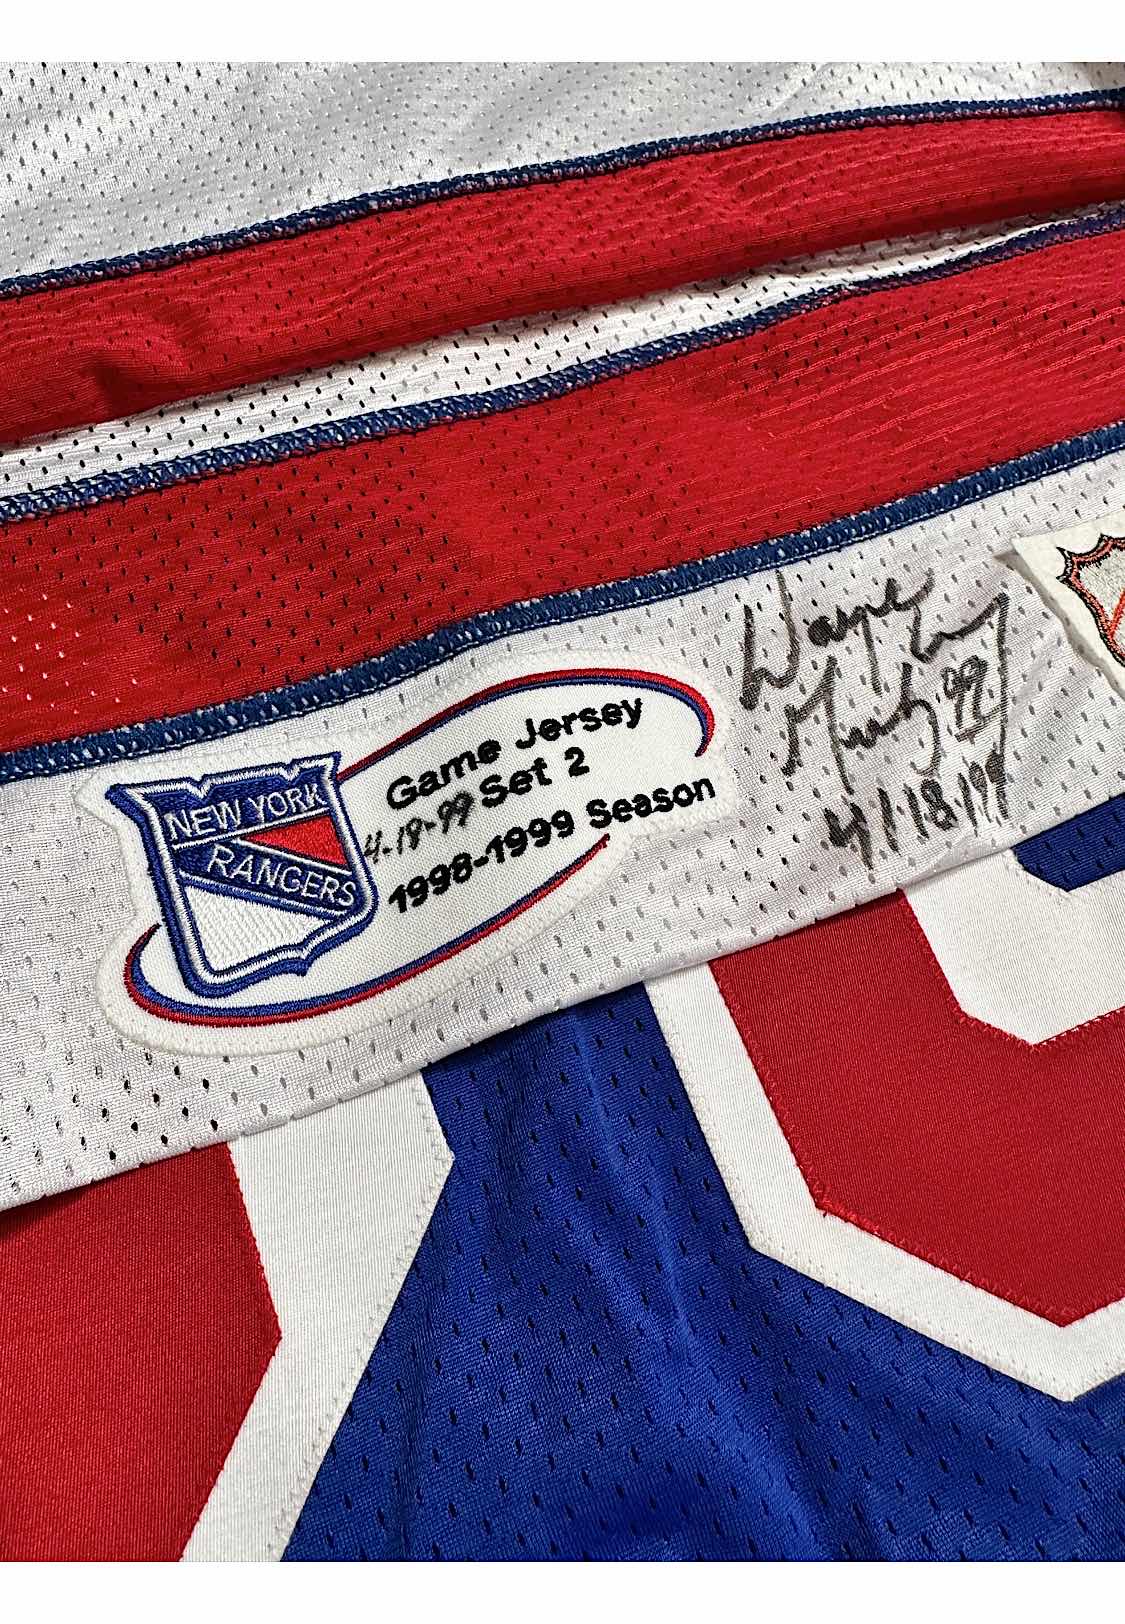 Lot Detail - 4/18/1999 Wayne Gretzky NY Rangers Final Career Game-Used &  Signed Jersey (Photo-Matched To Record Setting & Last Career Point • MSGs  Defining Moments Museum • MeiGray & JSA LOAs)